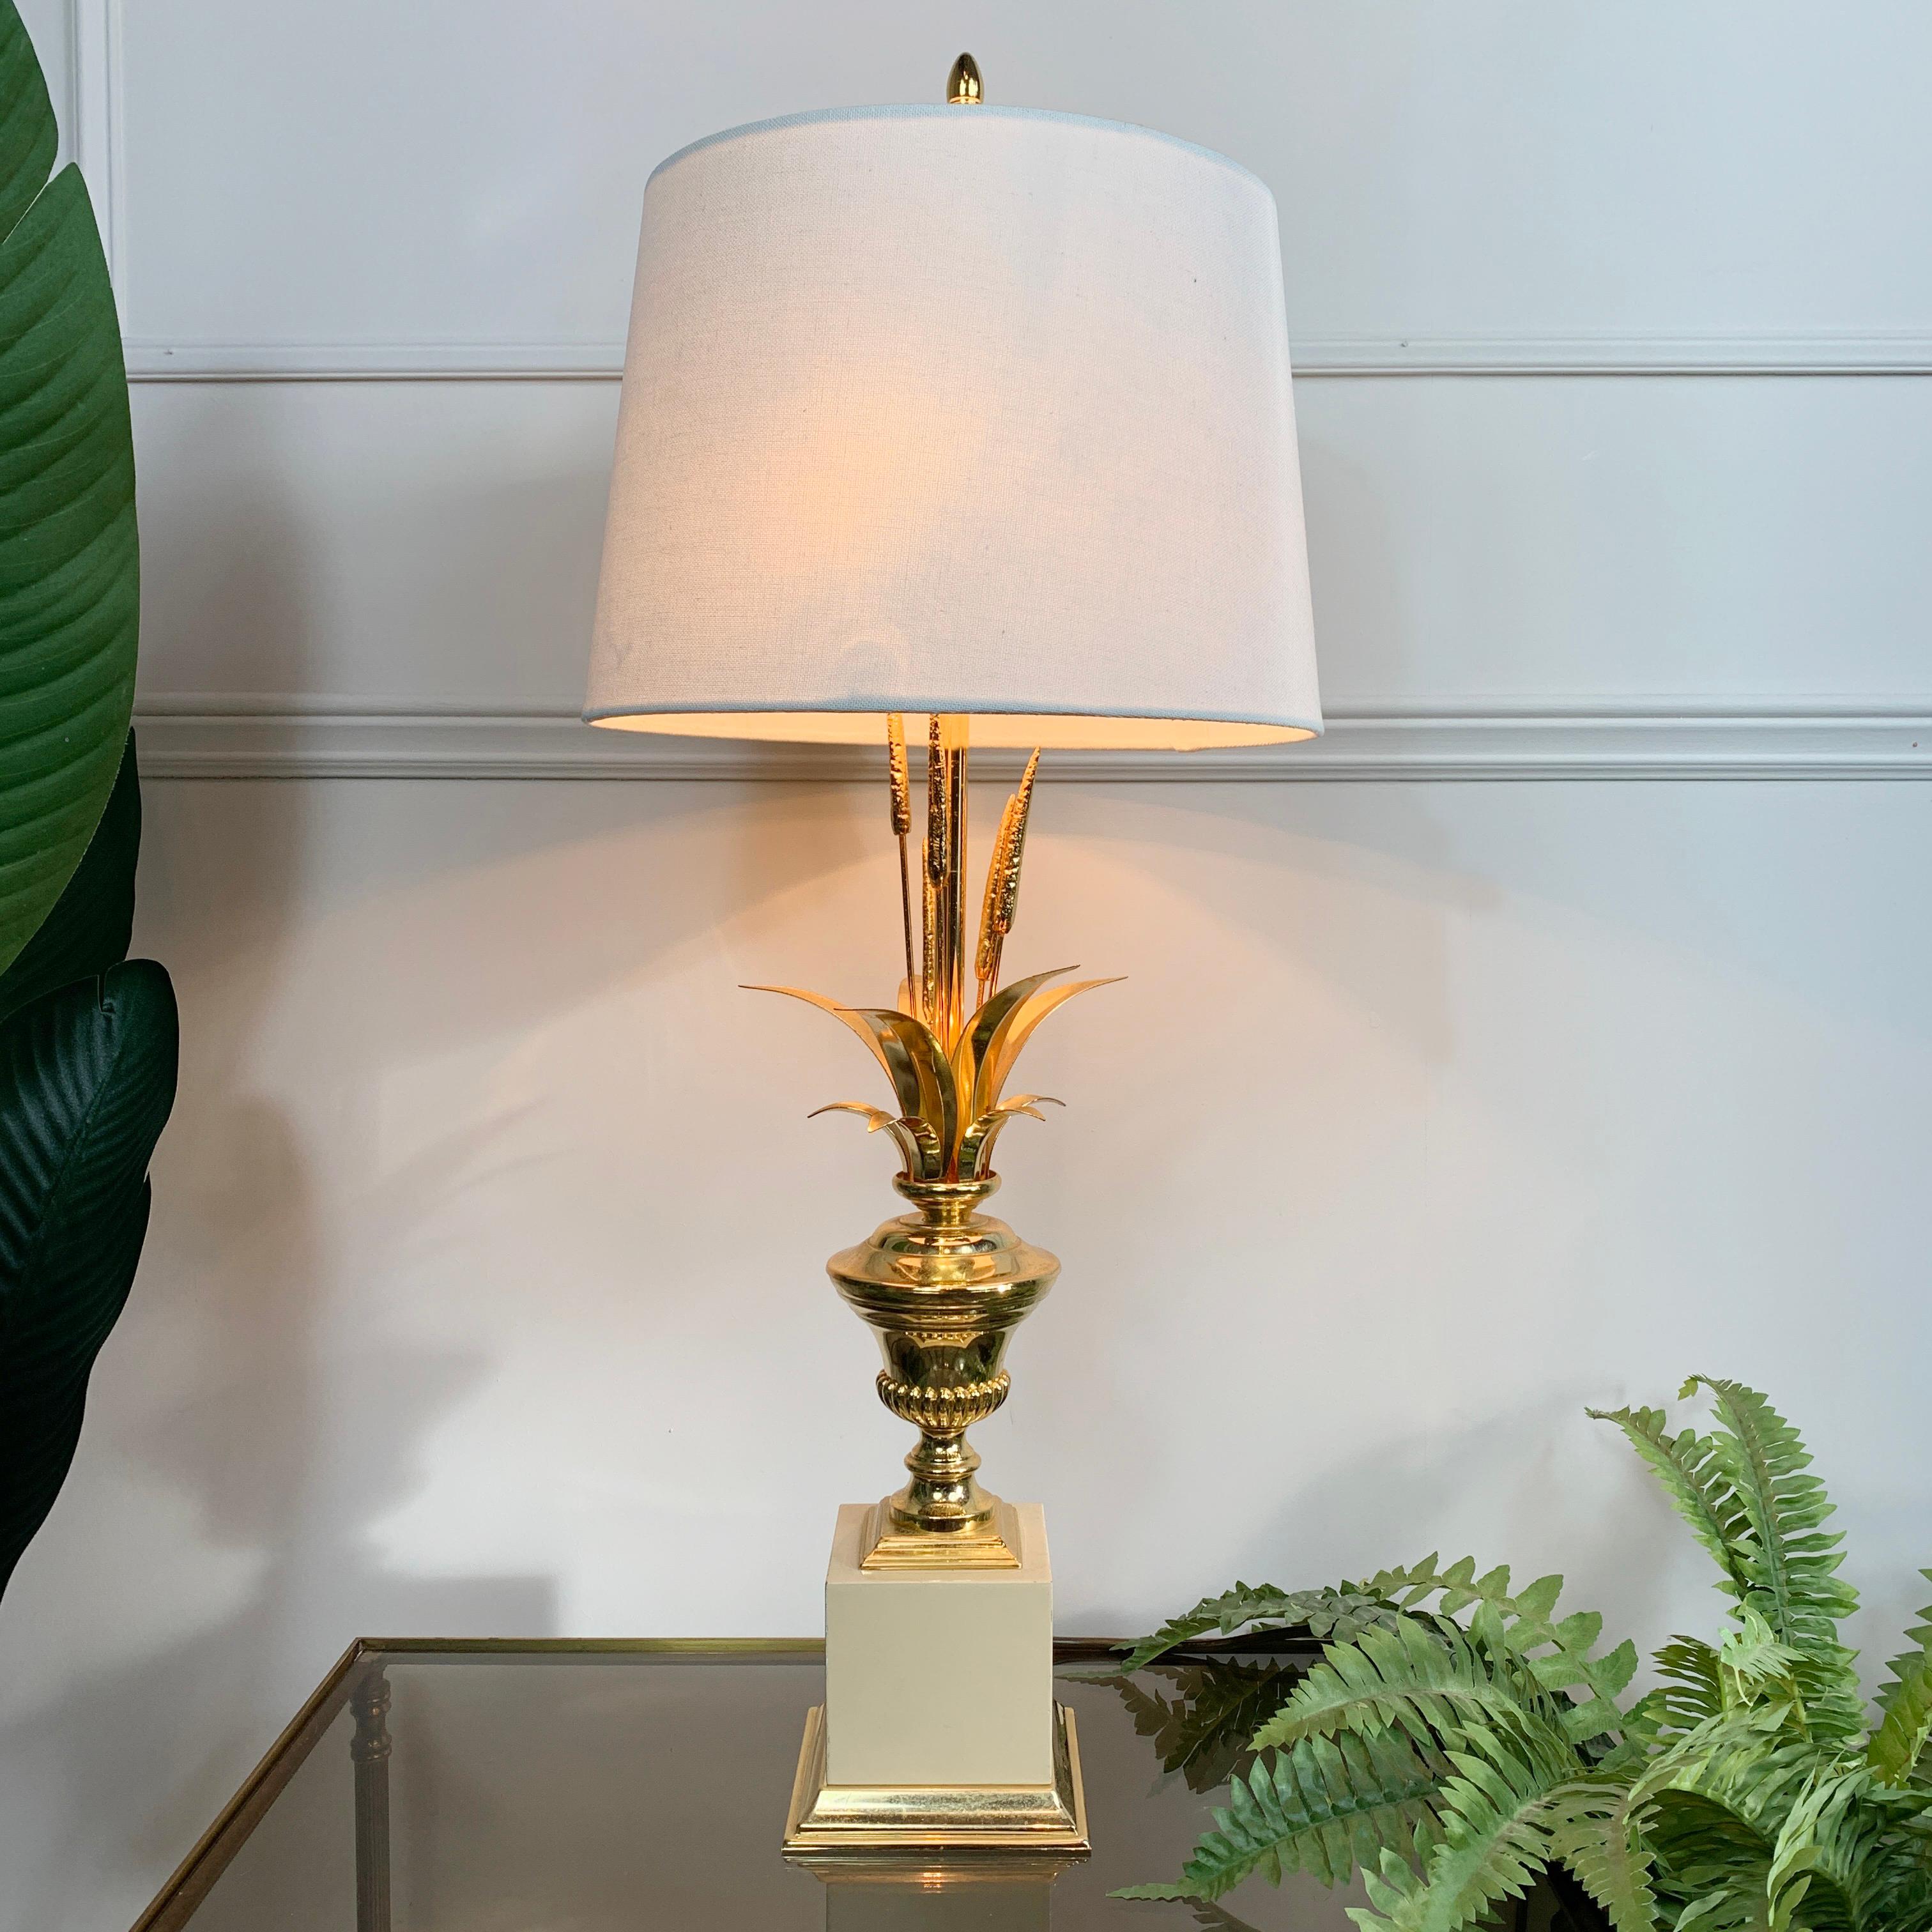 Hollywood Regency Lanciotto Galeotti Gold Table Lamp Italy 1970's for l'originale For Sale